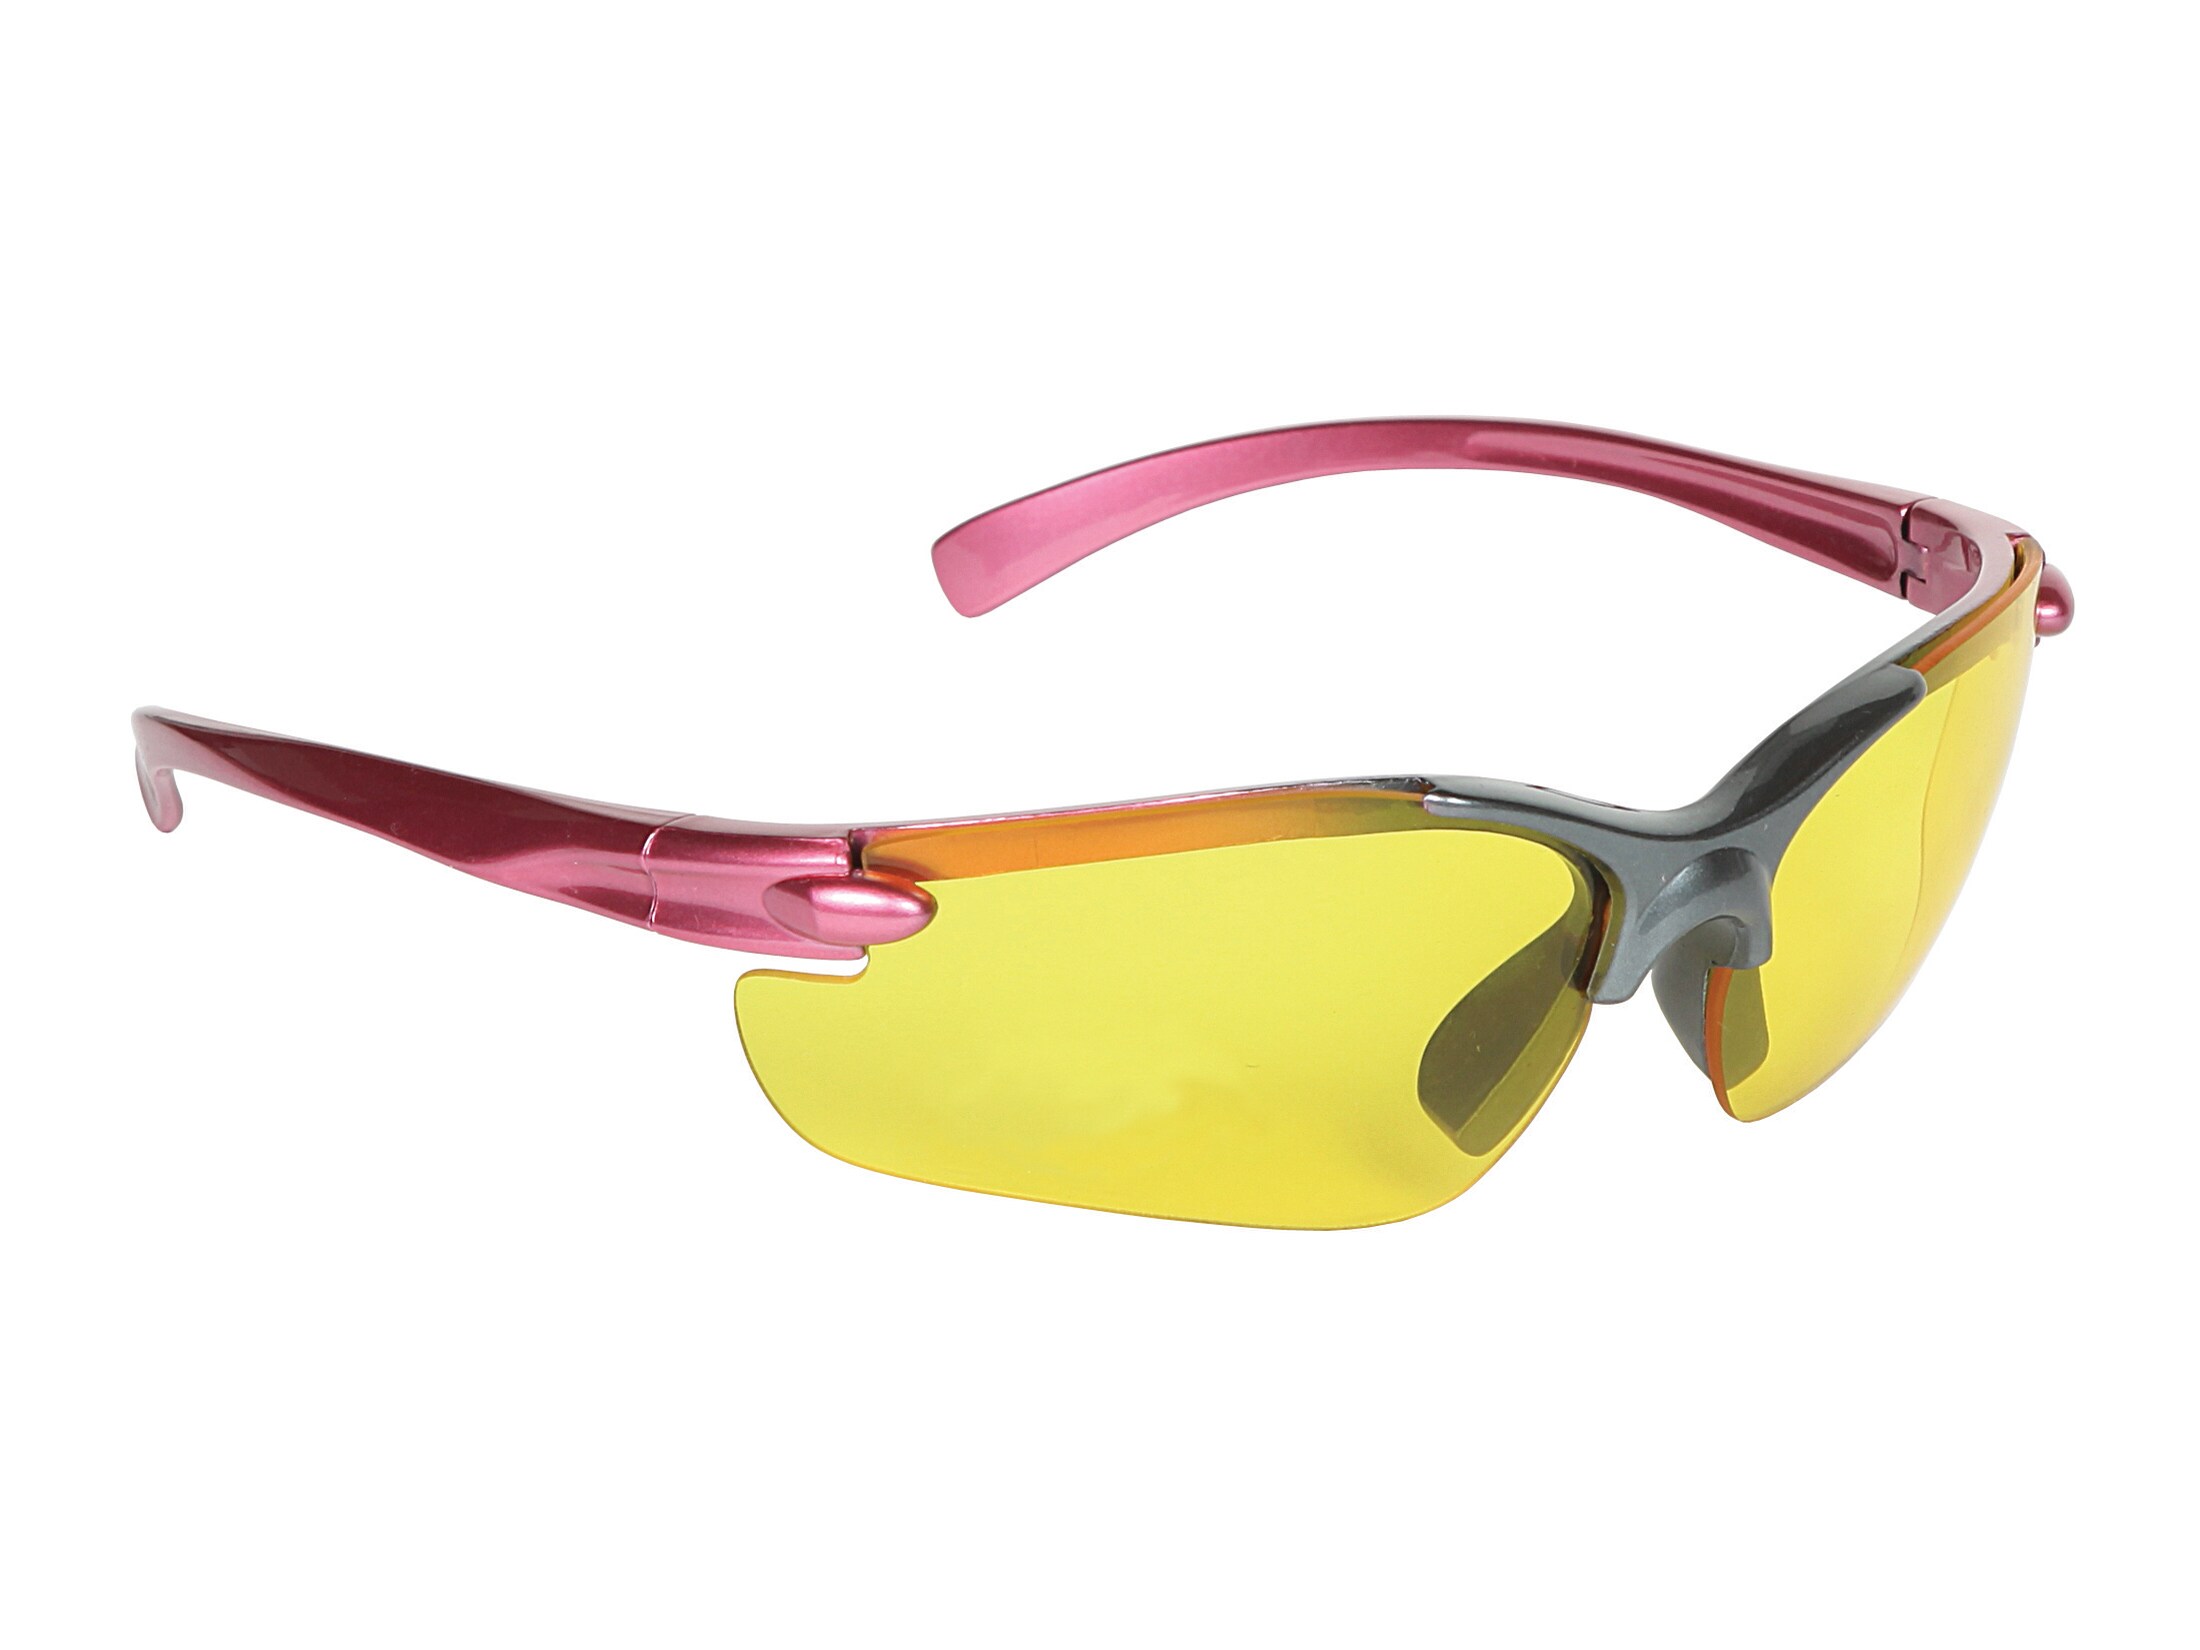 NRA Polycarbonate Lens Shooting Glasses YELLOW 